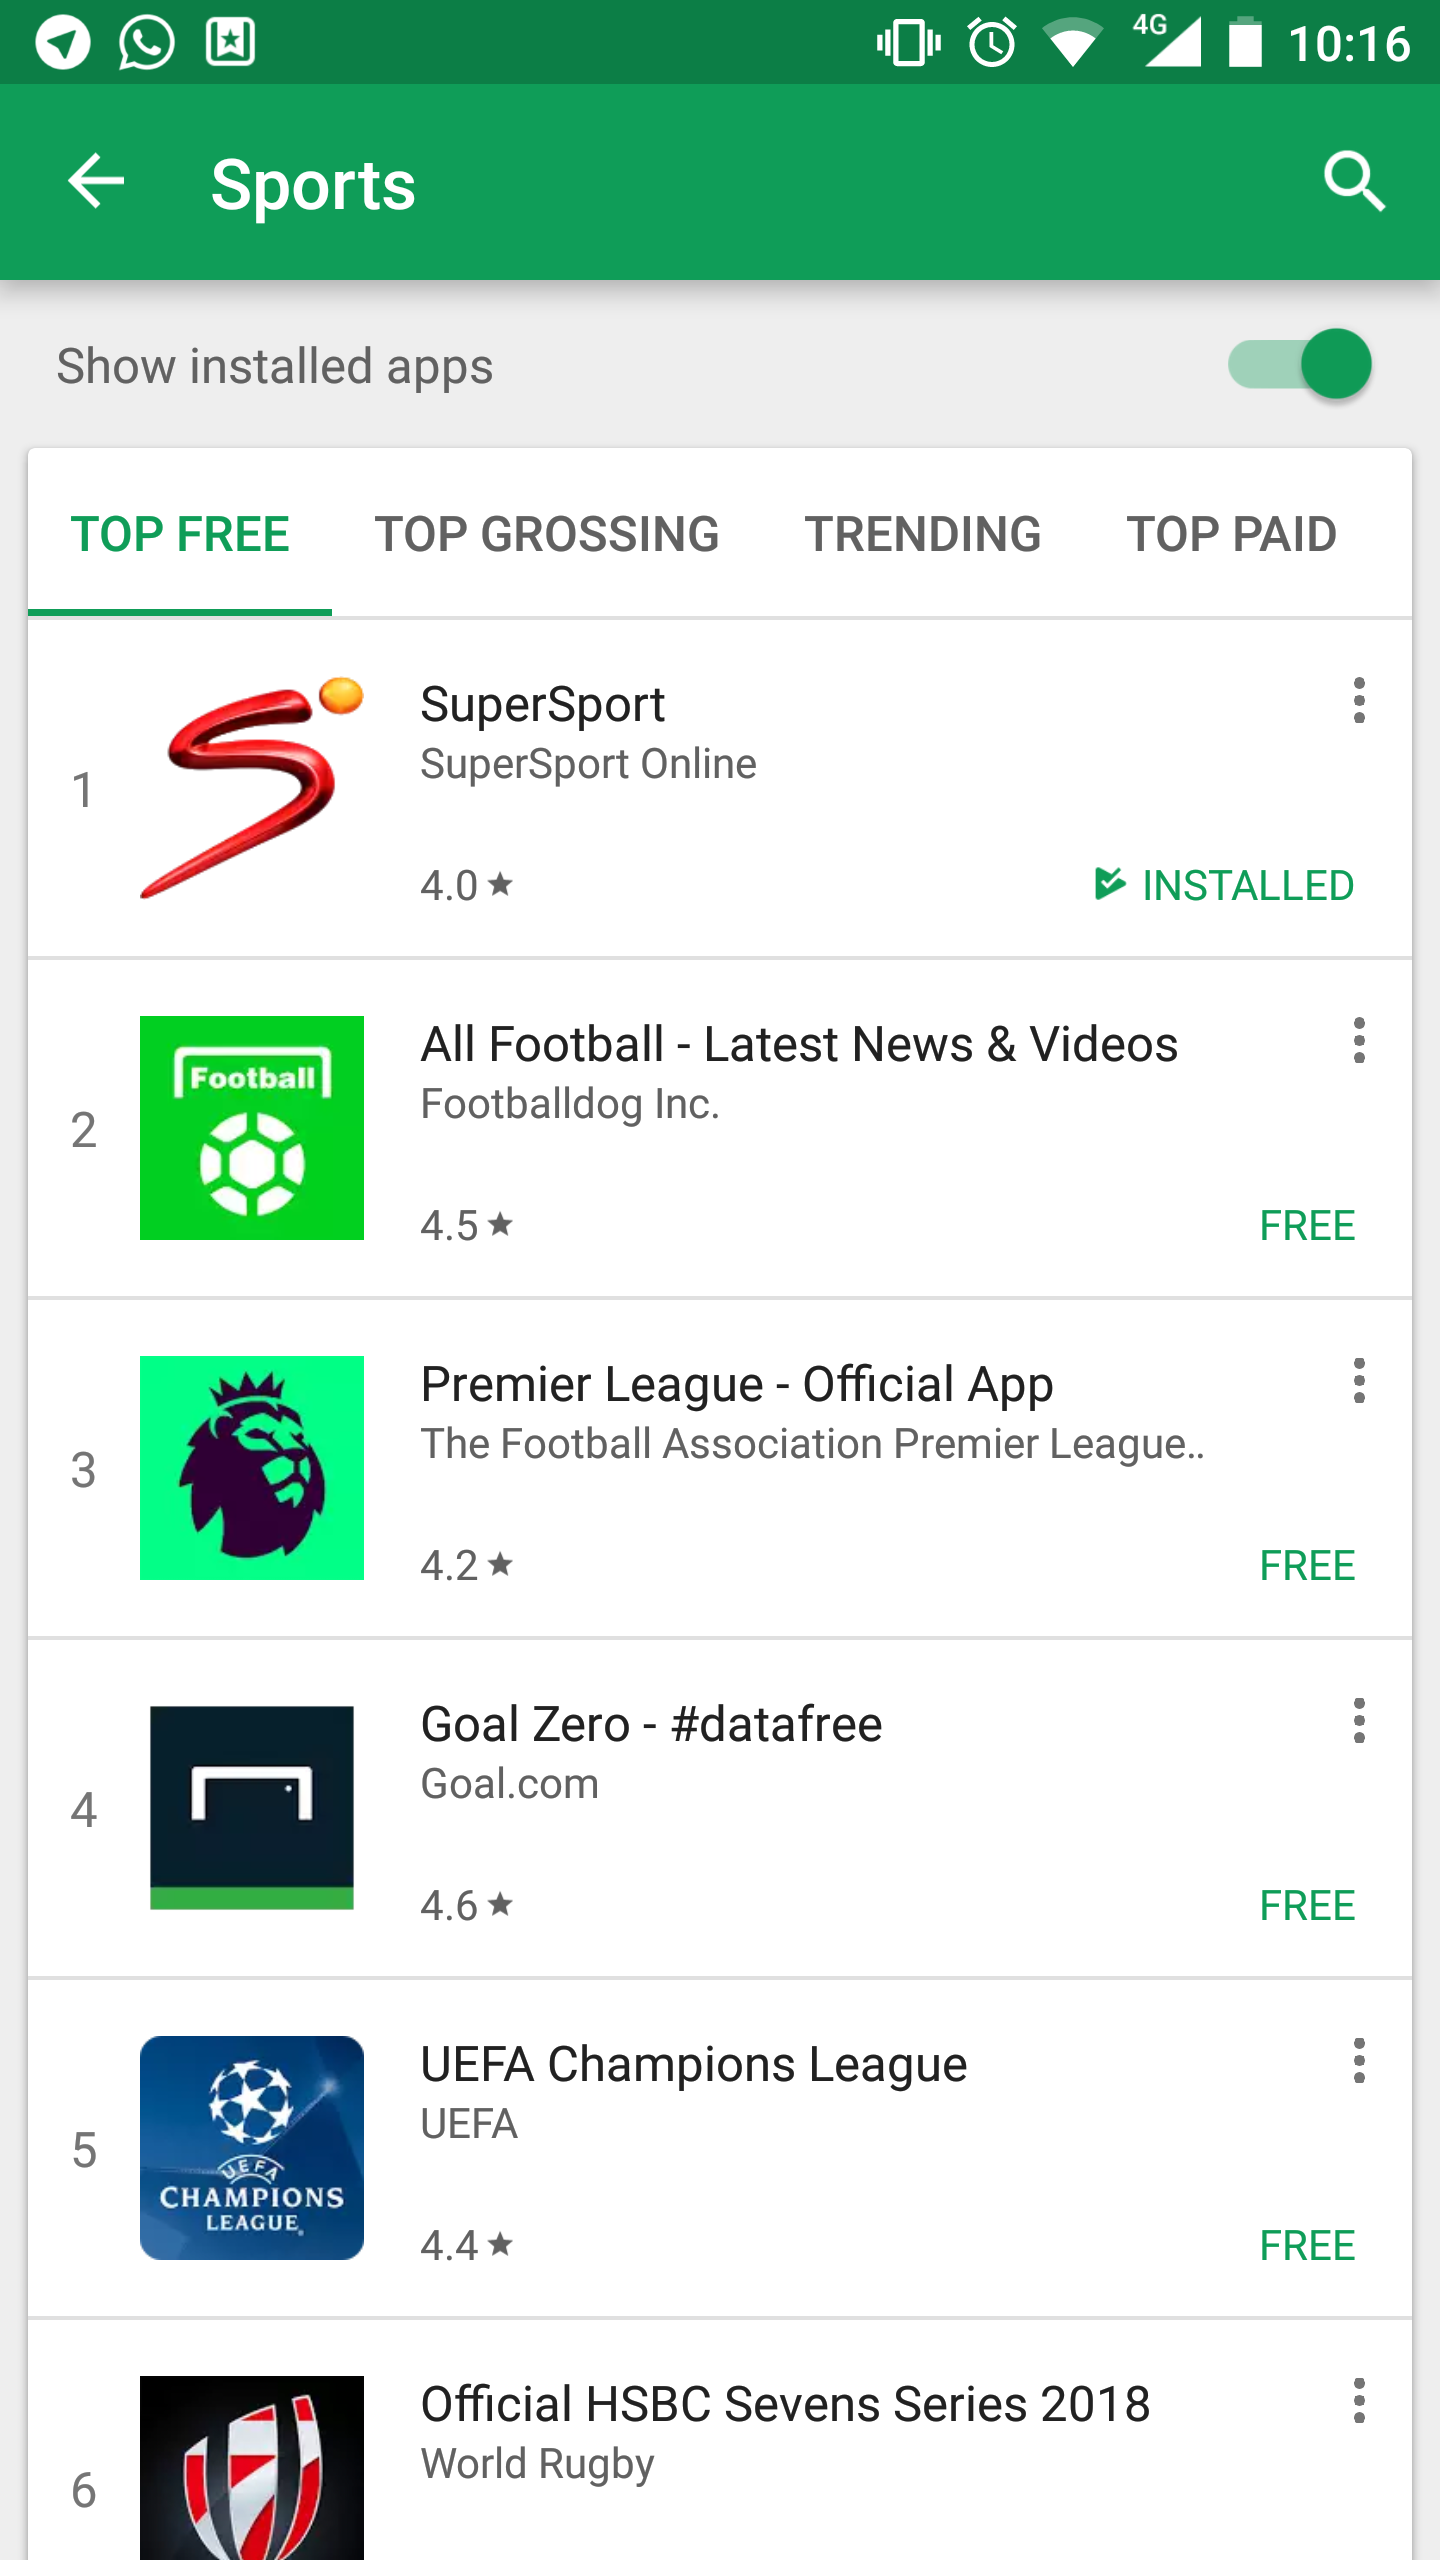 SuperSport is number one in the Sports category